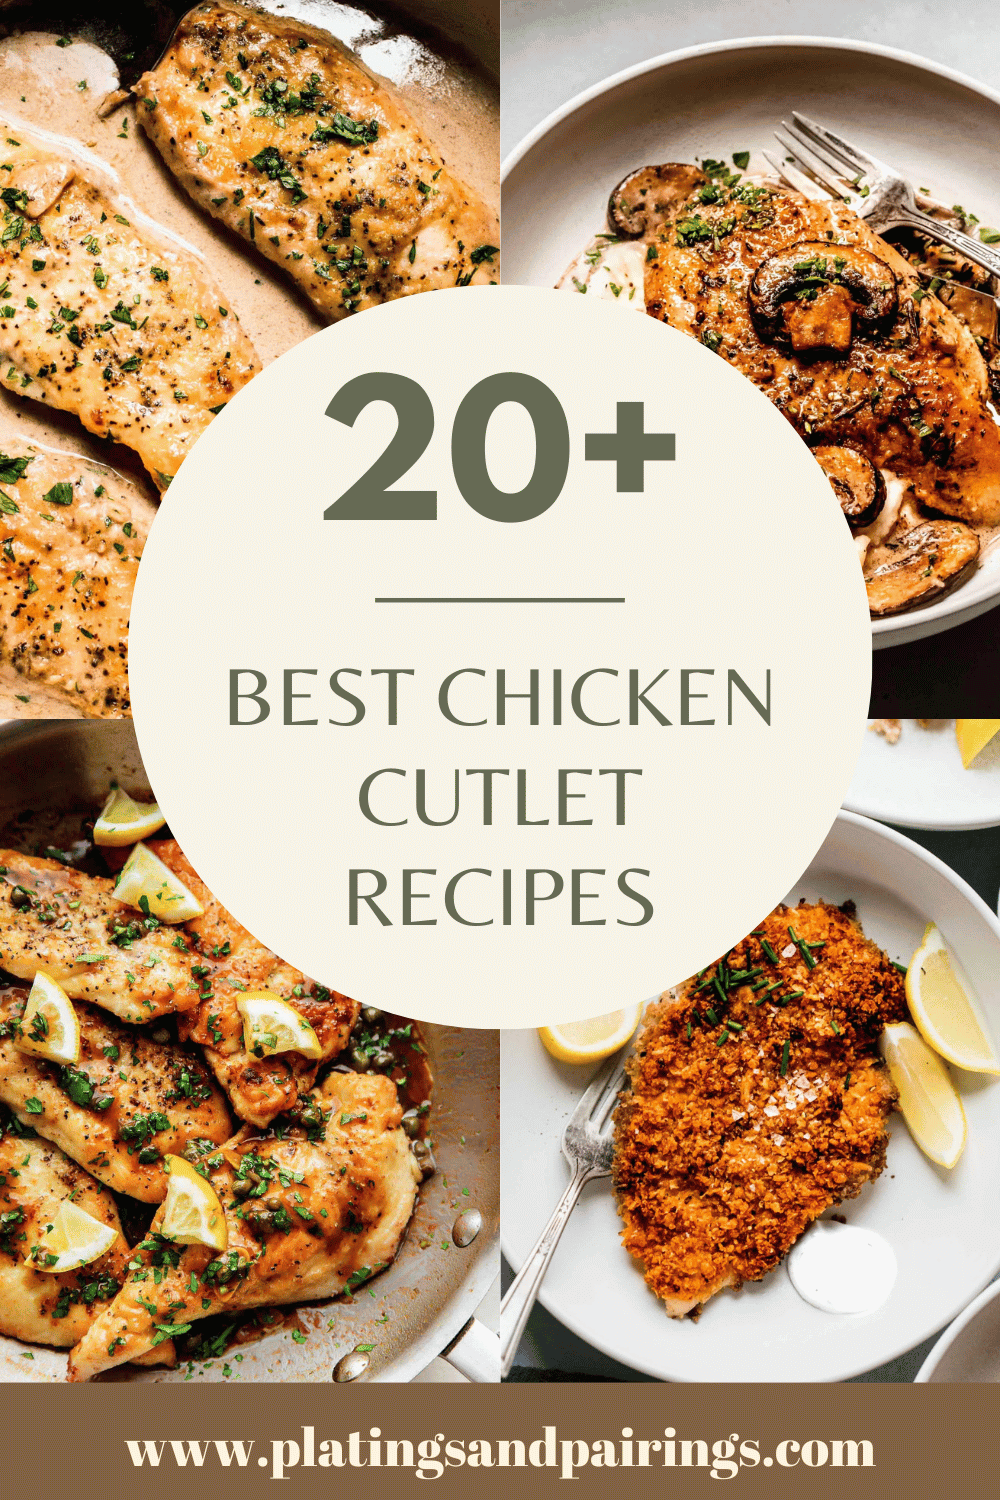 Collage of chicken cutlet recipes with text overlay.